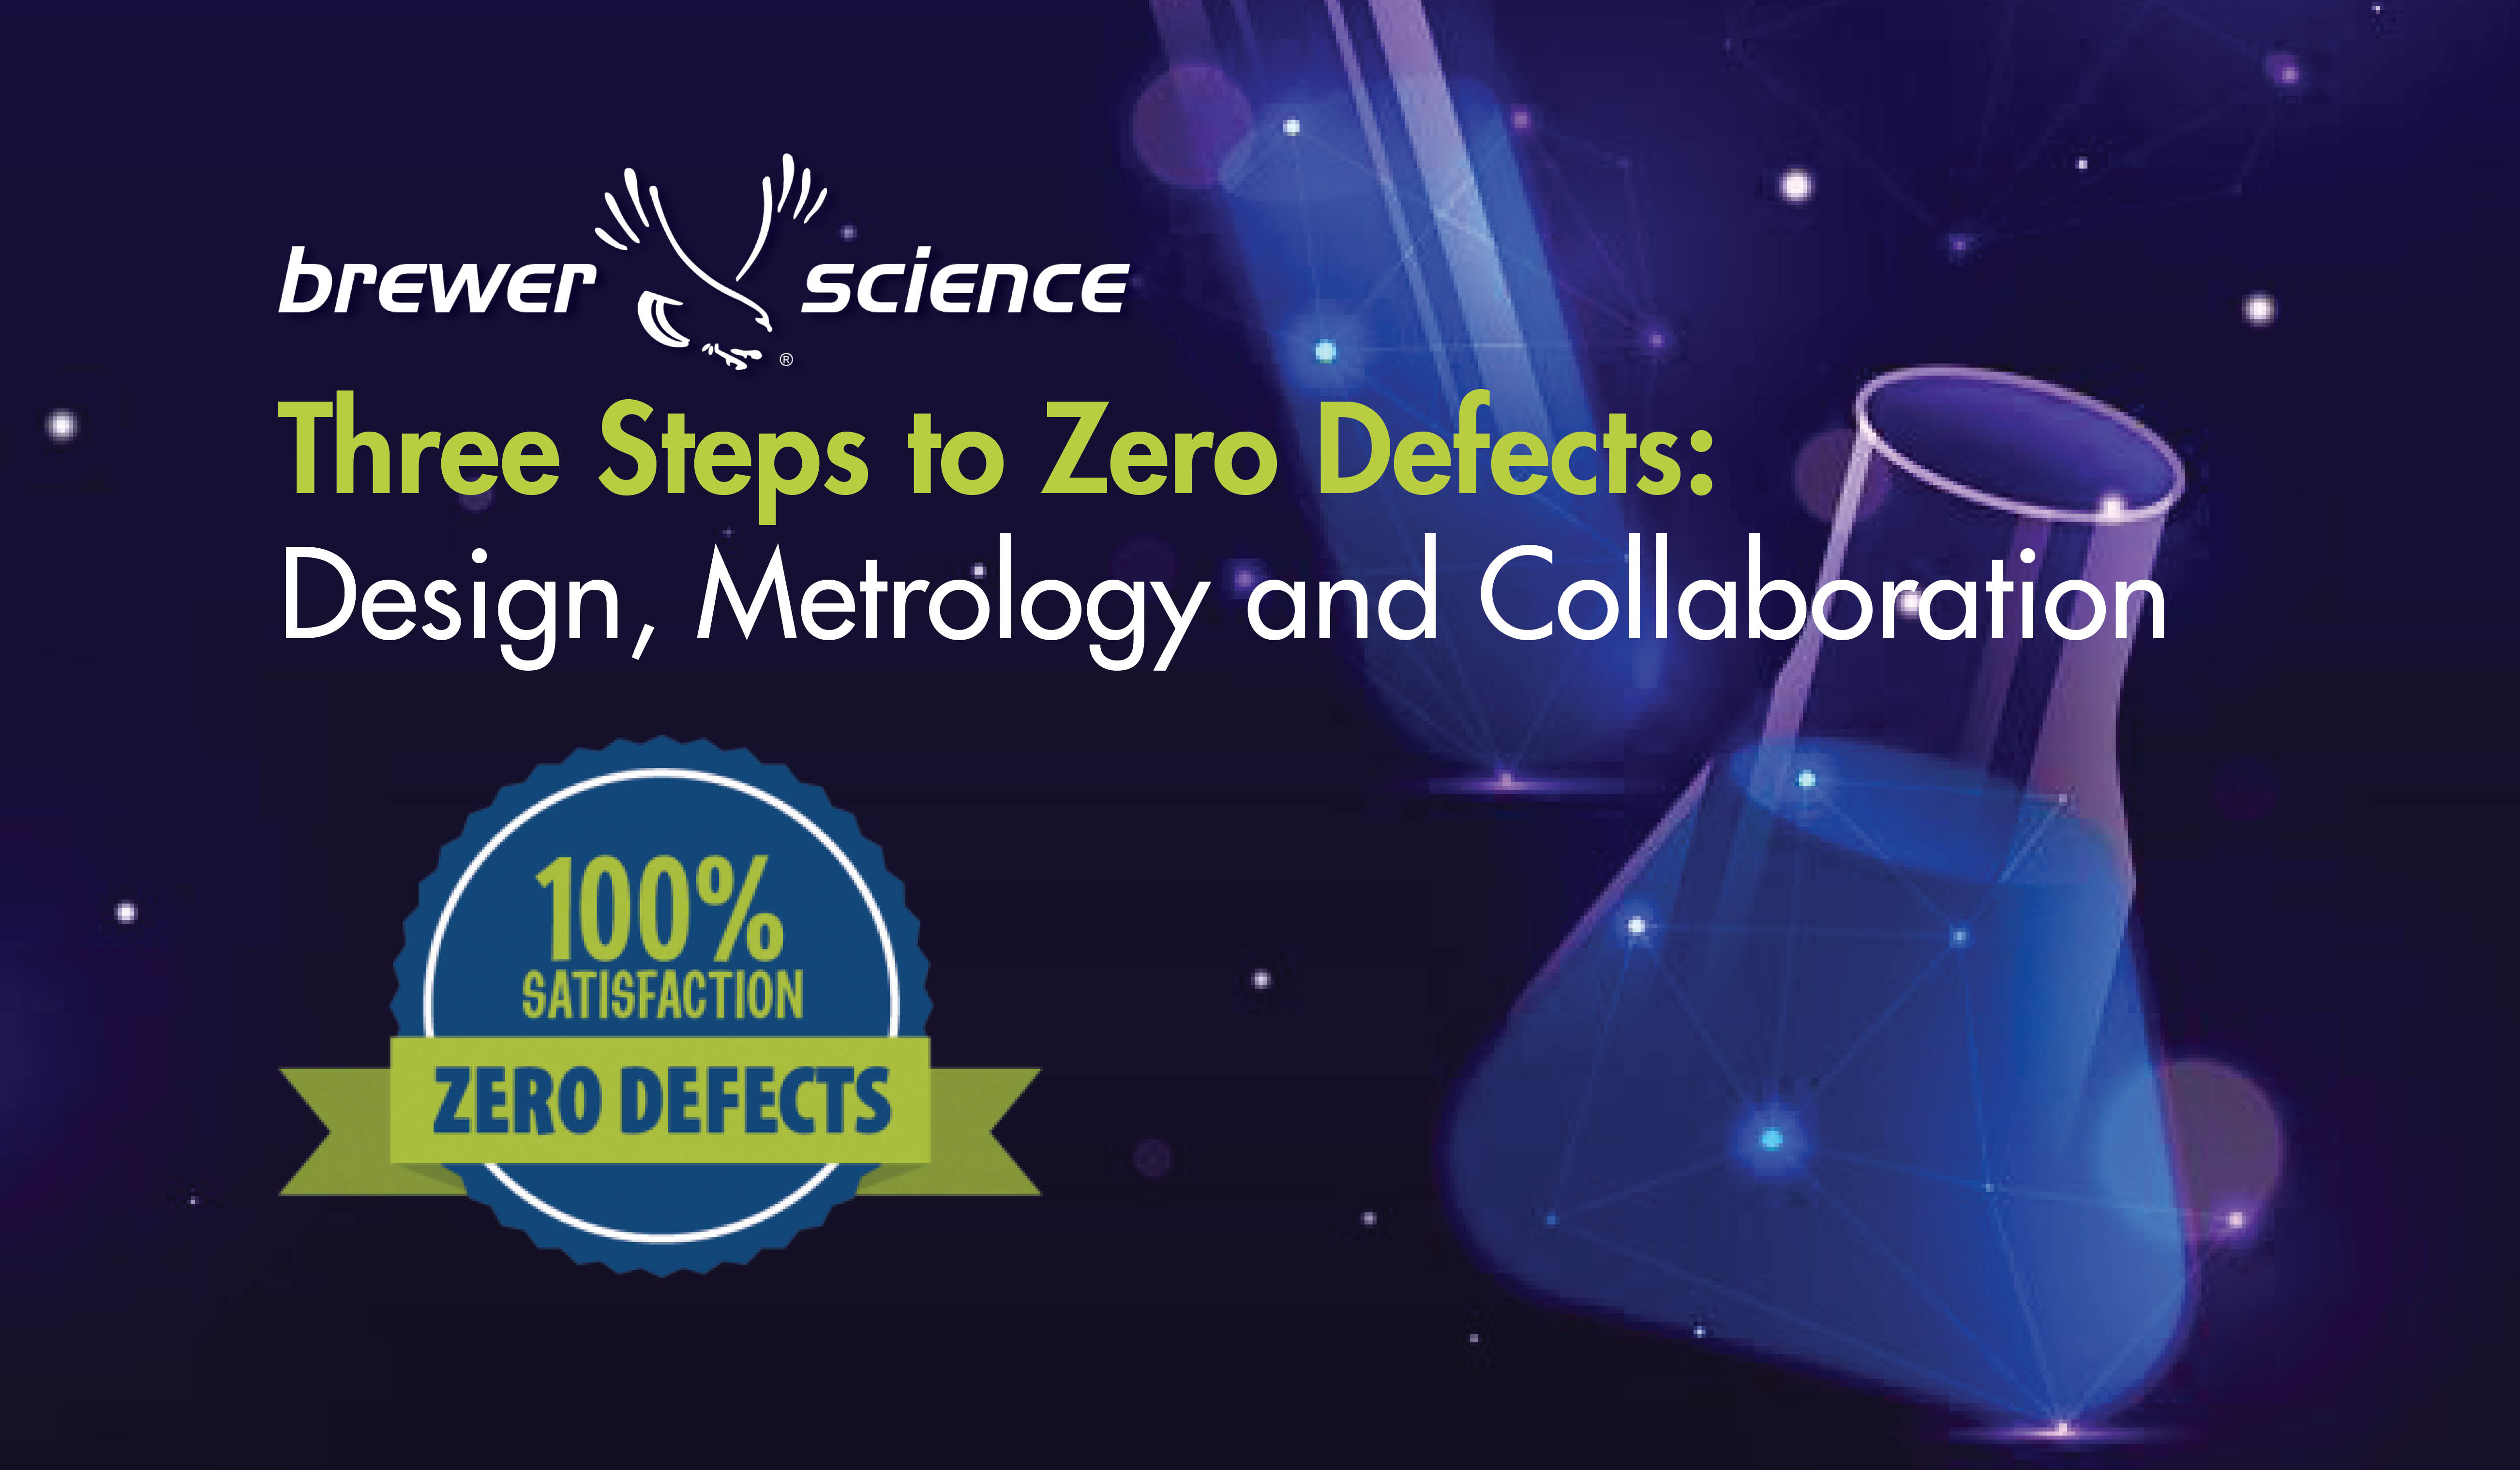 Three Steps to Zero Defects: Design, Metrology and Collaboration